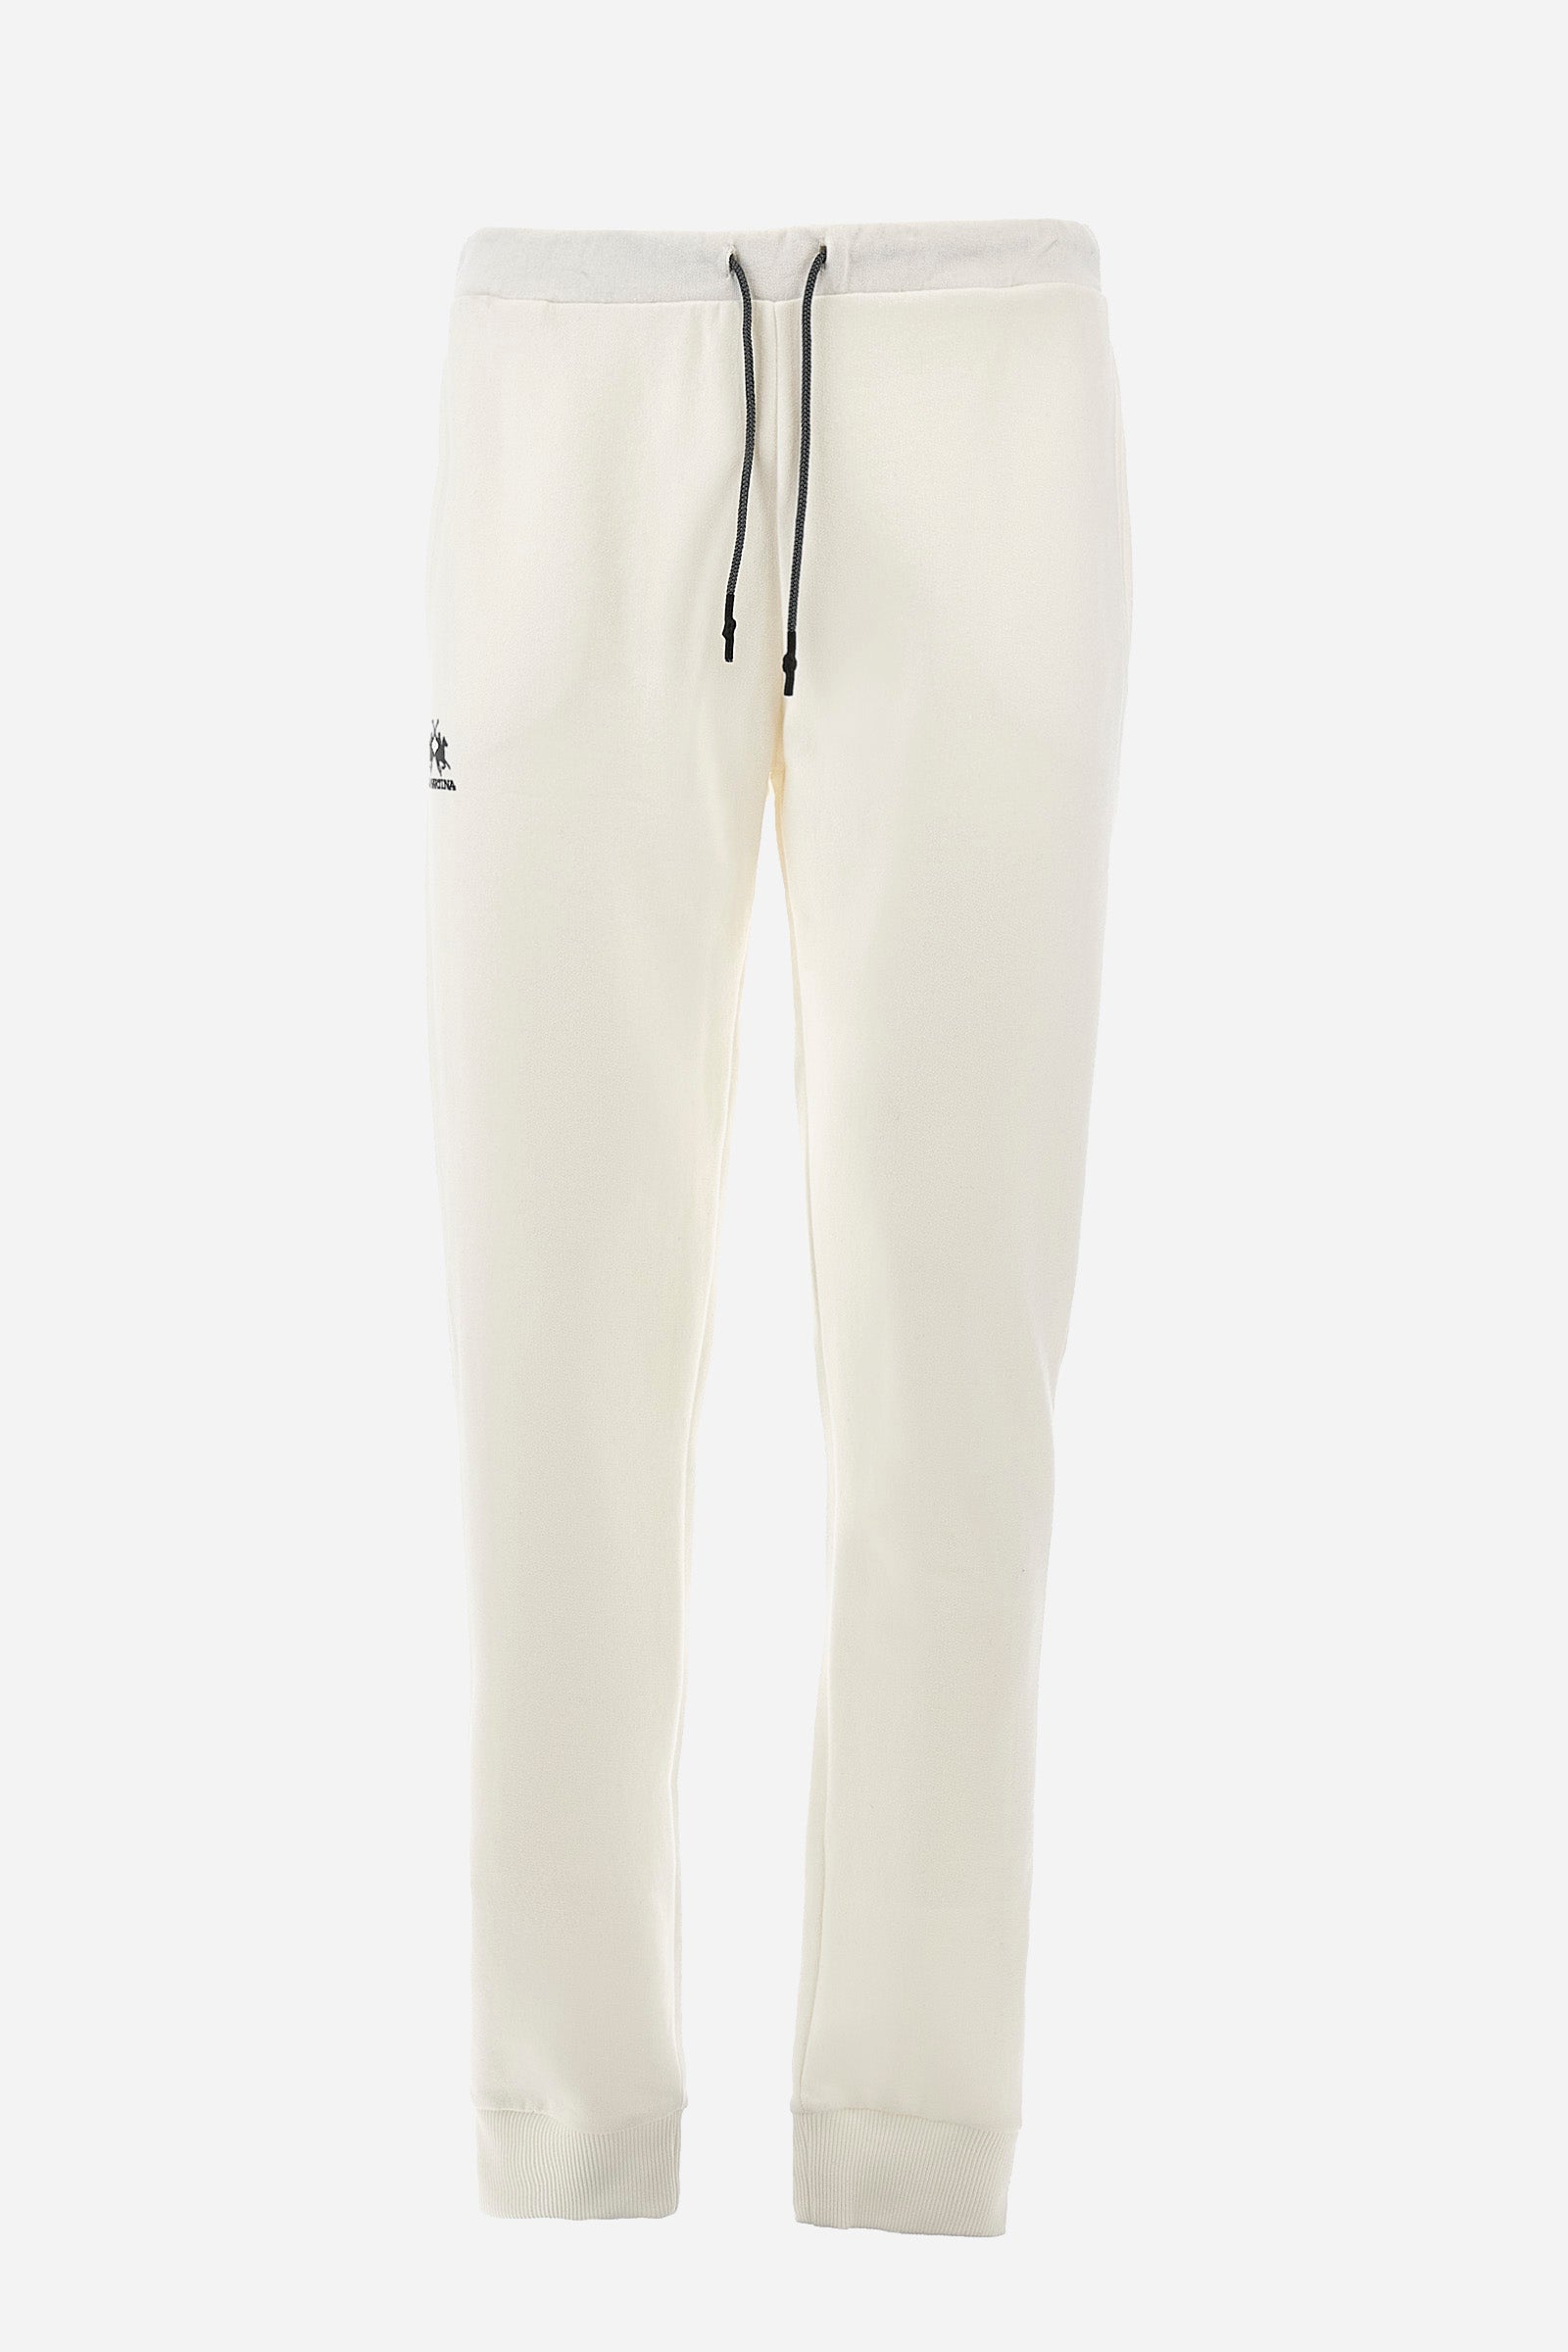 Men's jogging trousers in a regular fit - Paco